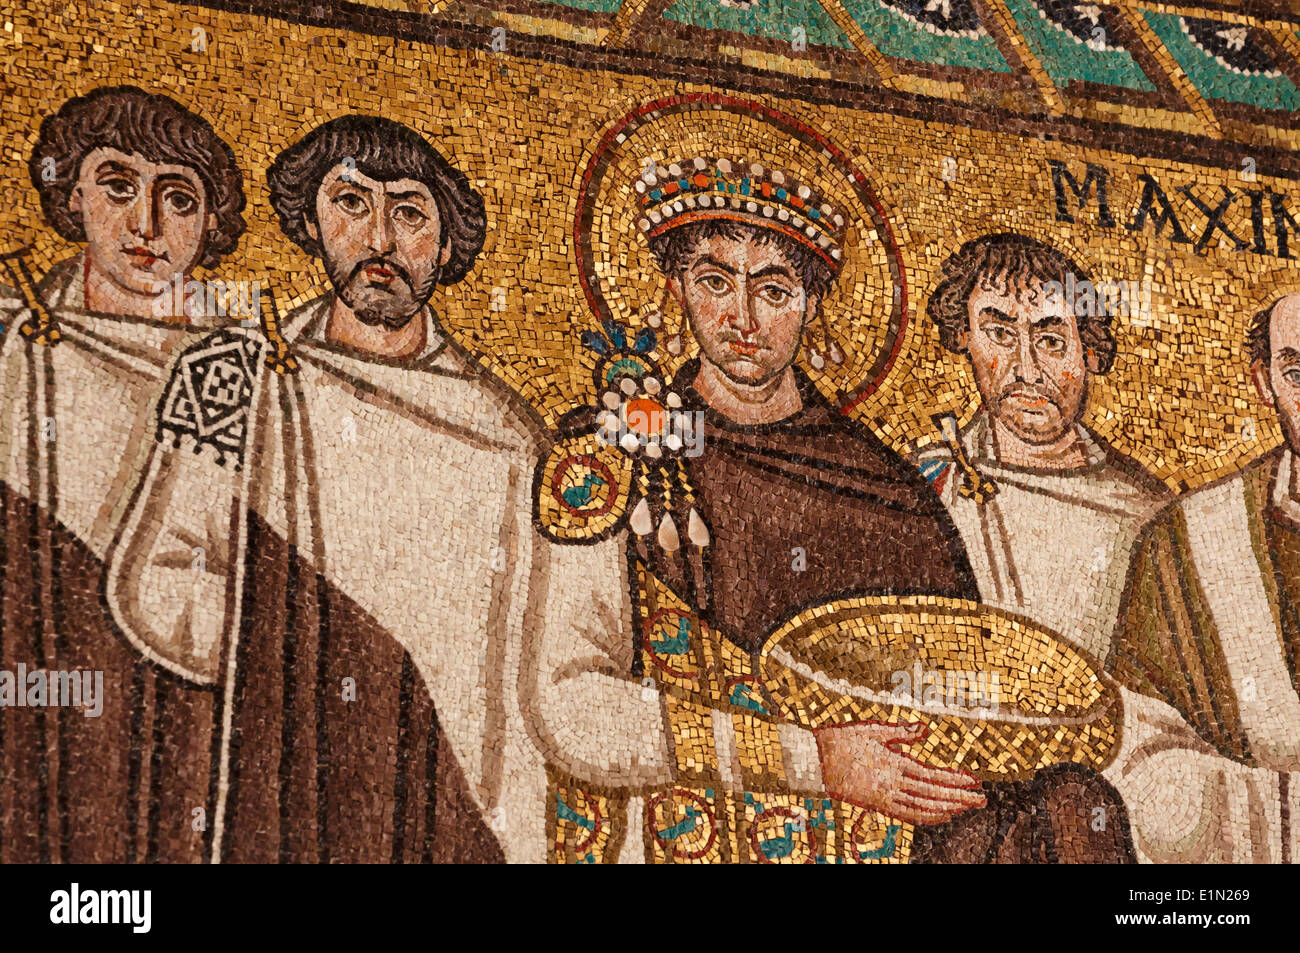 Ravenna, Ravenna Province, Italy. Mosaic in San Vitale basilica of Emperor Justinian I with members of his court. Stock Photo